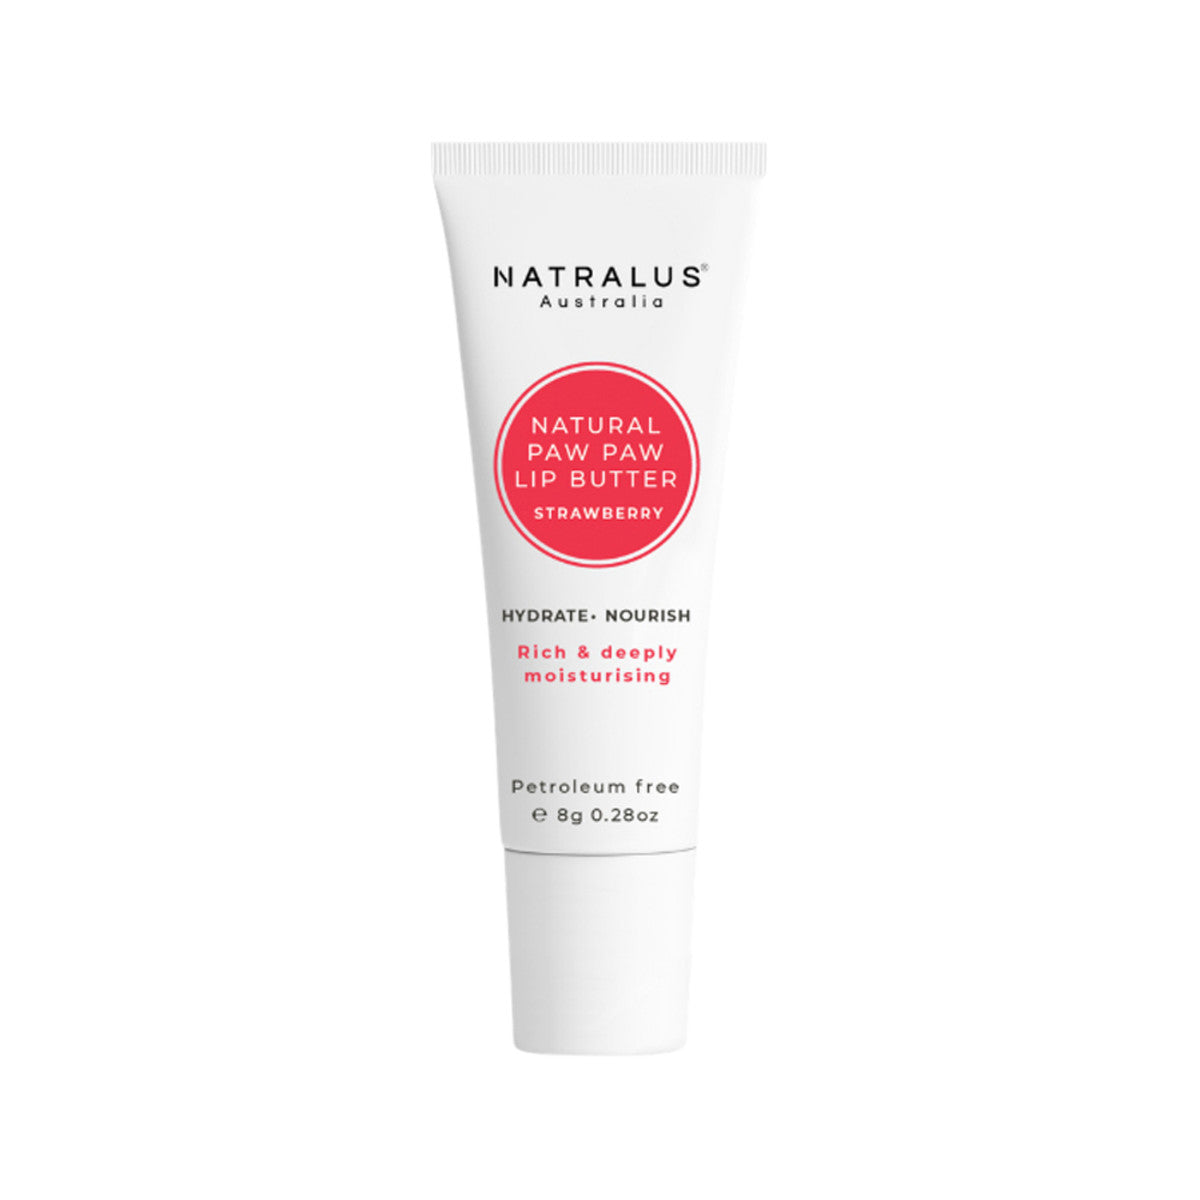 Natralus - Natural Paw Paw Lip Butter Strawberry